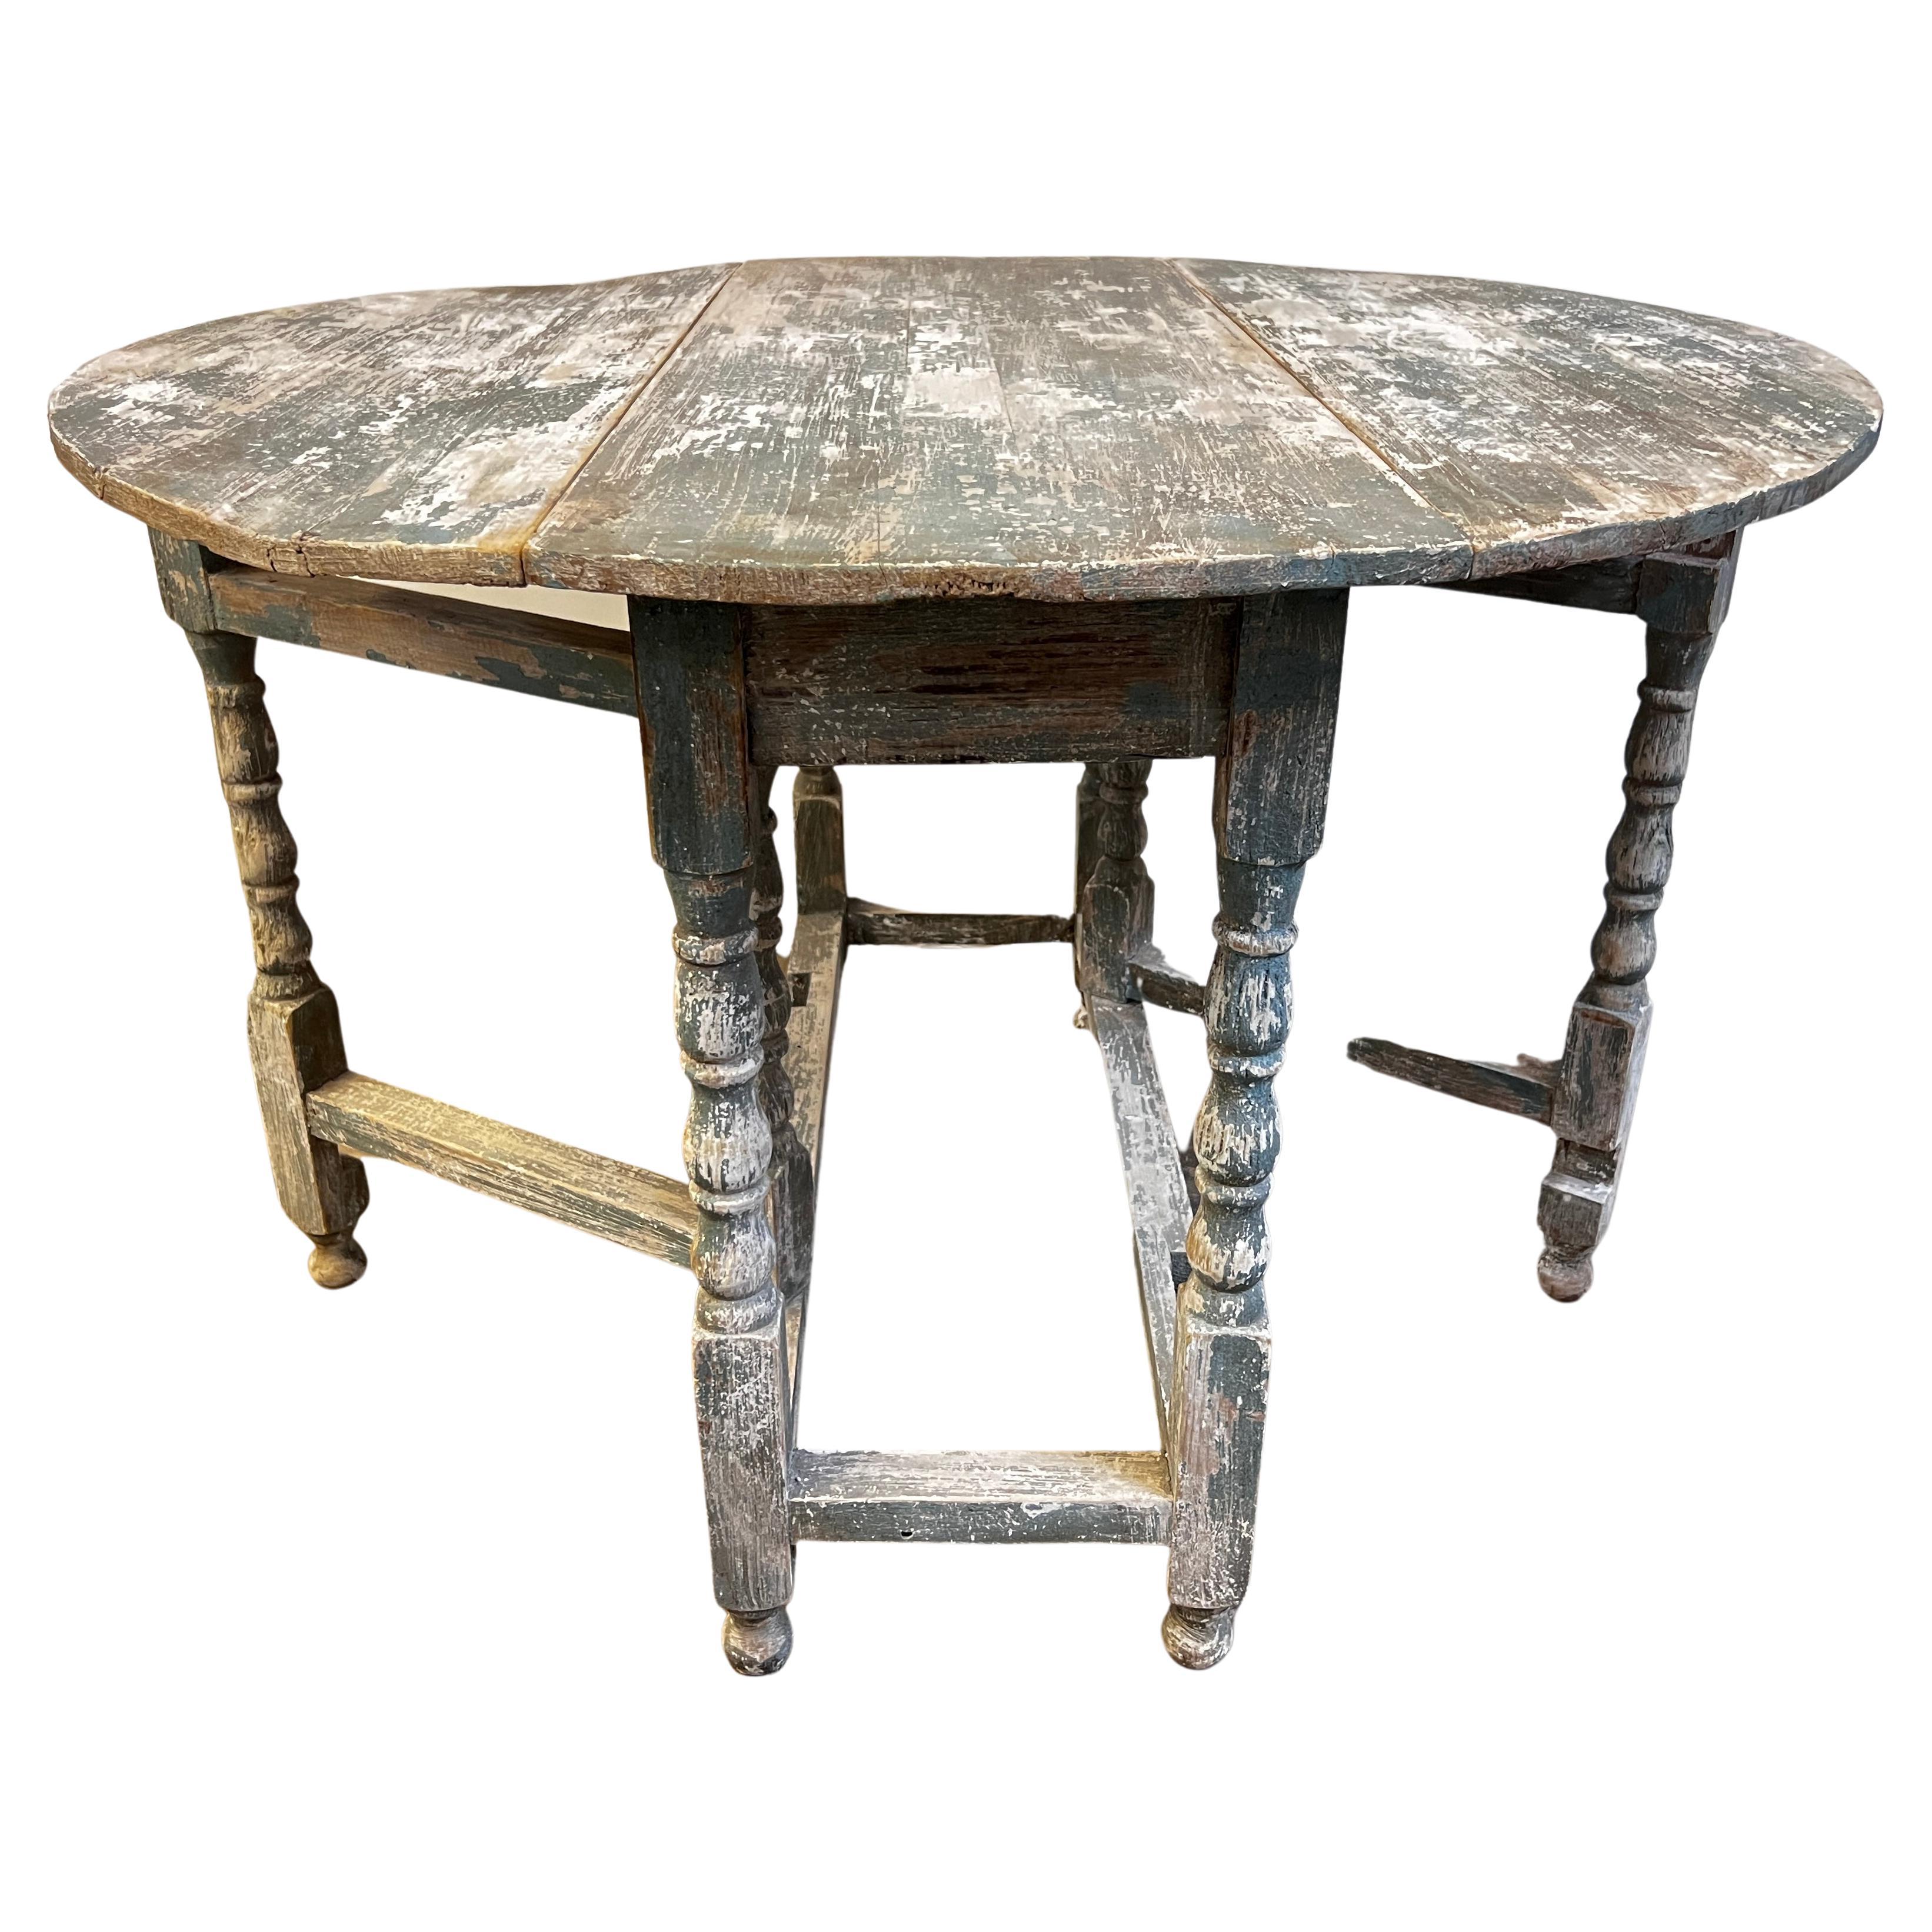 Here is a beautiful early 19th century Swedish Gustavian drop leaf table with a gate leg. Dry scrapped with beautiful and unique colors to this one. This piece is best used as a console as the drop leafs and swing legs are fragile. This has been